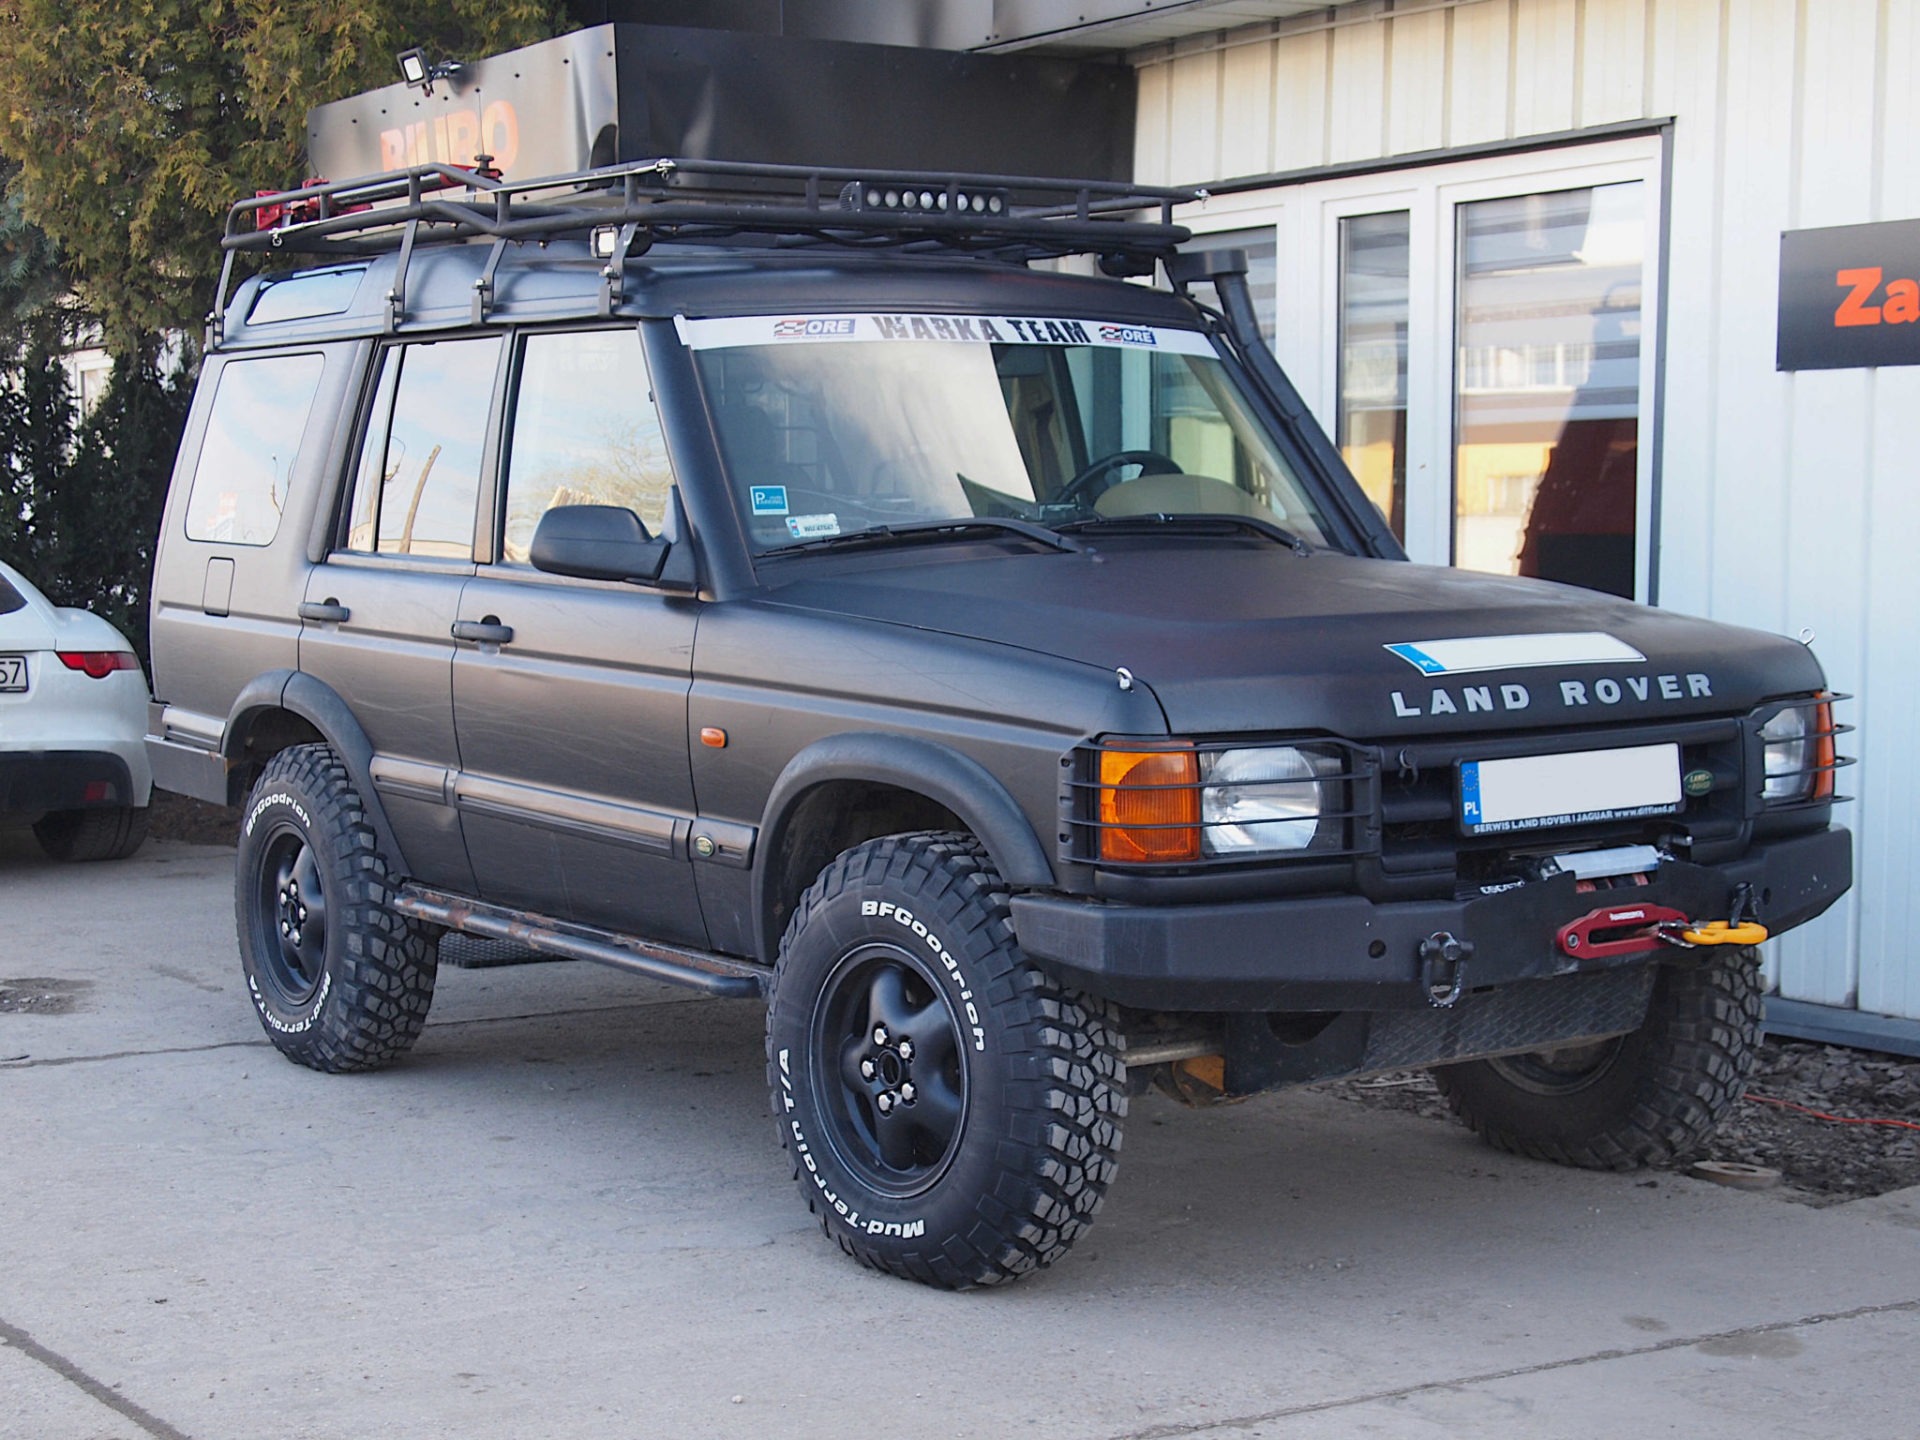 Land Rover Discovery II TD5 2000 diffland.pl Serwis